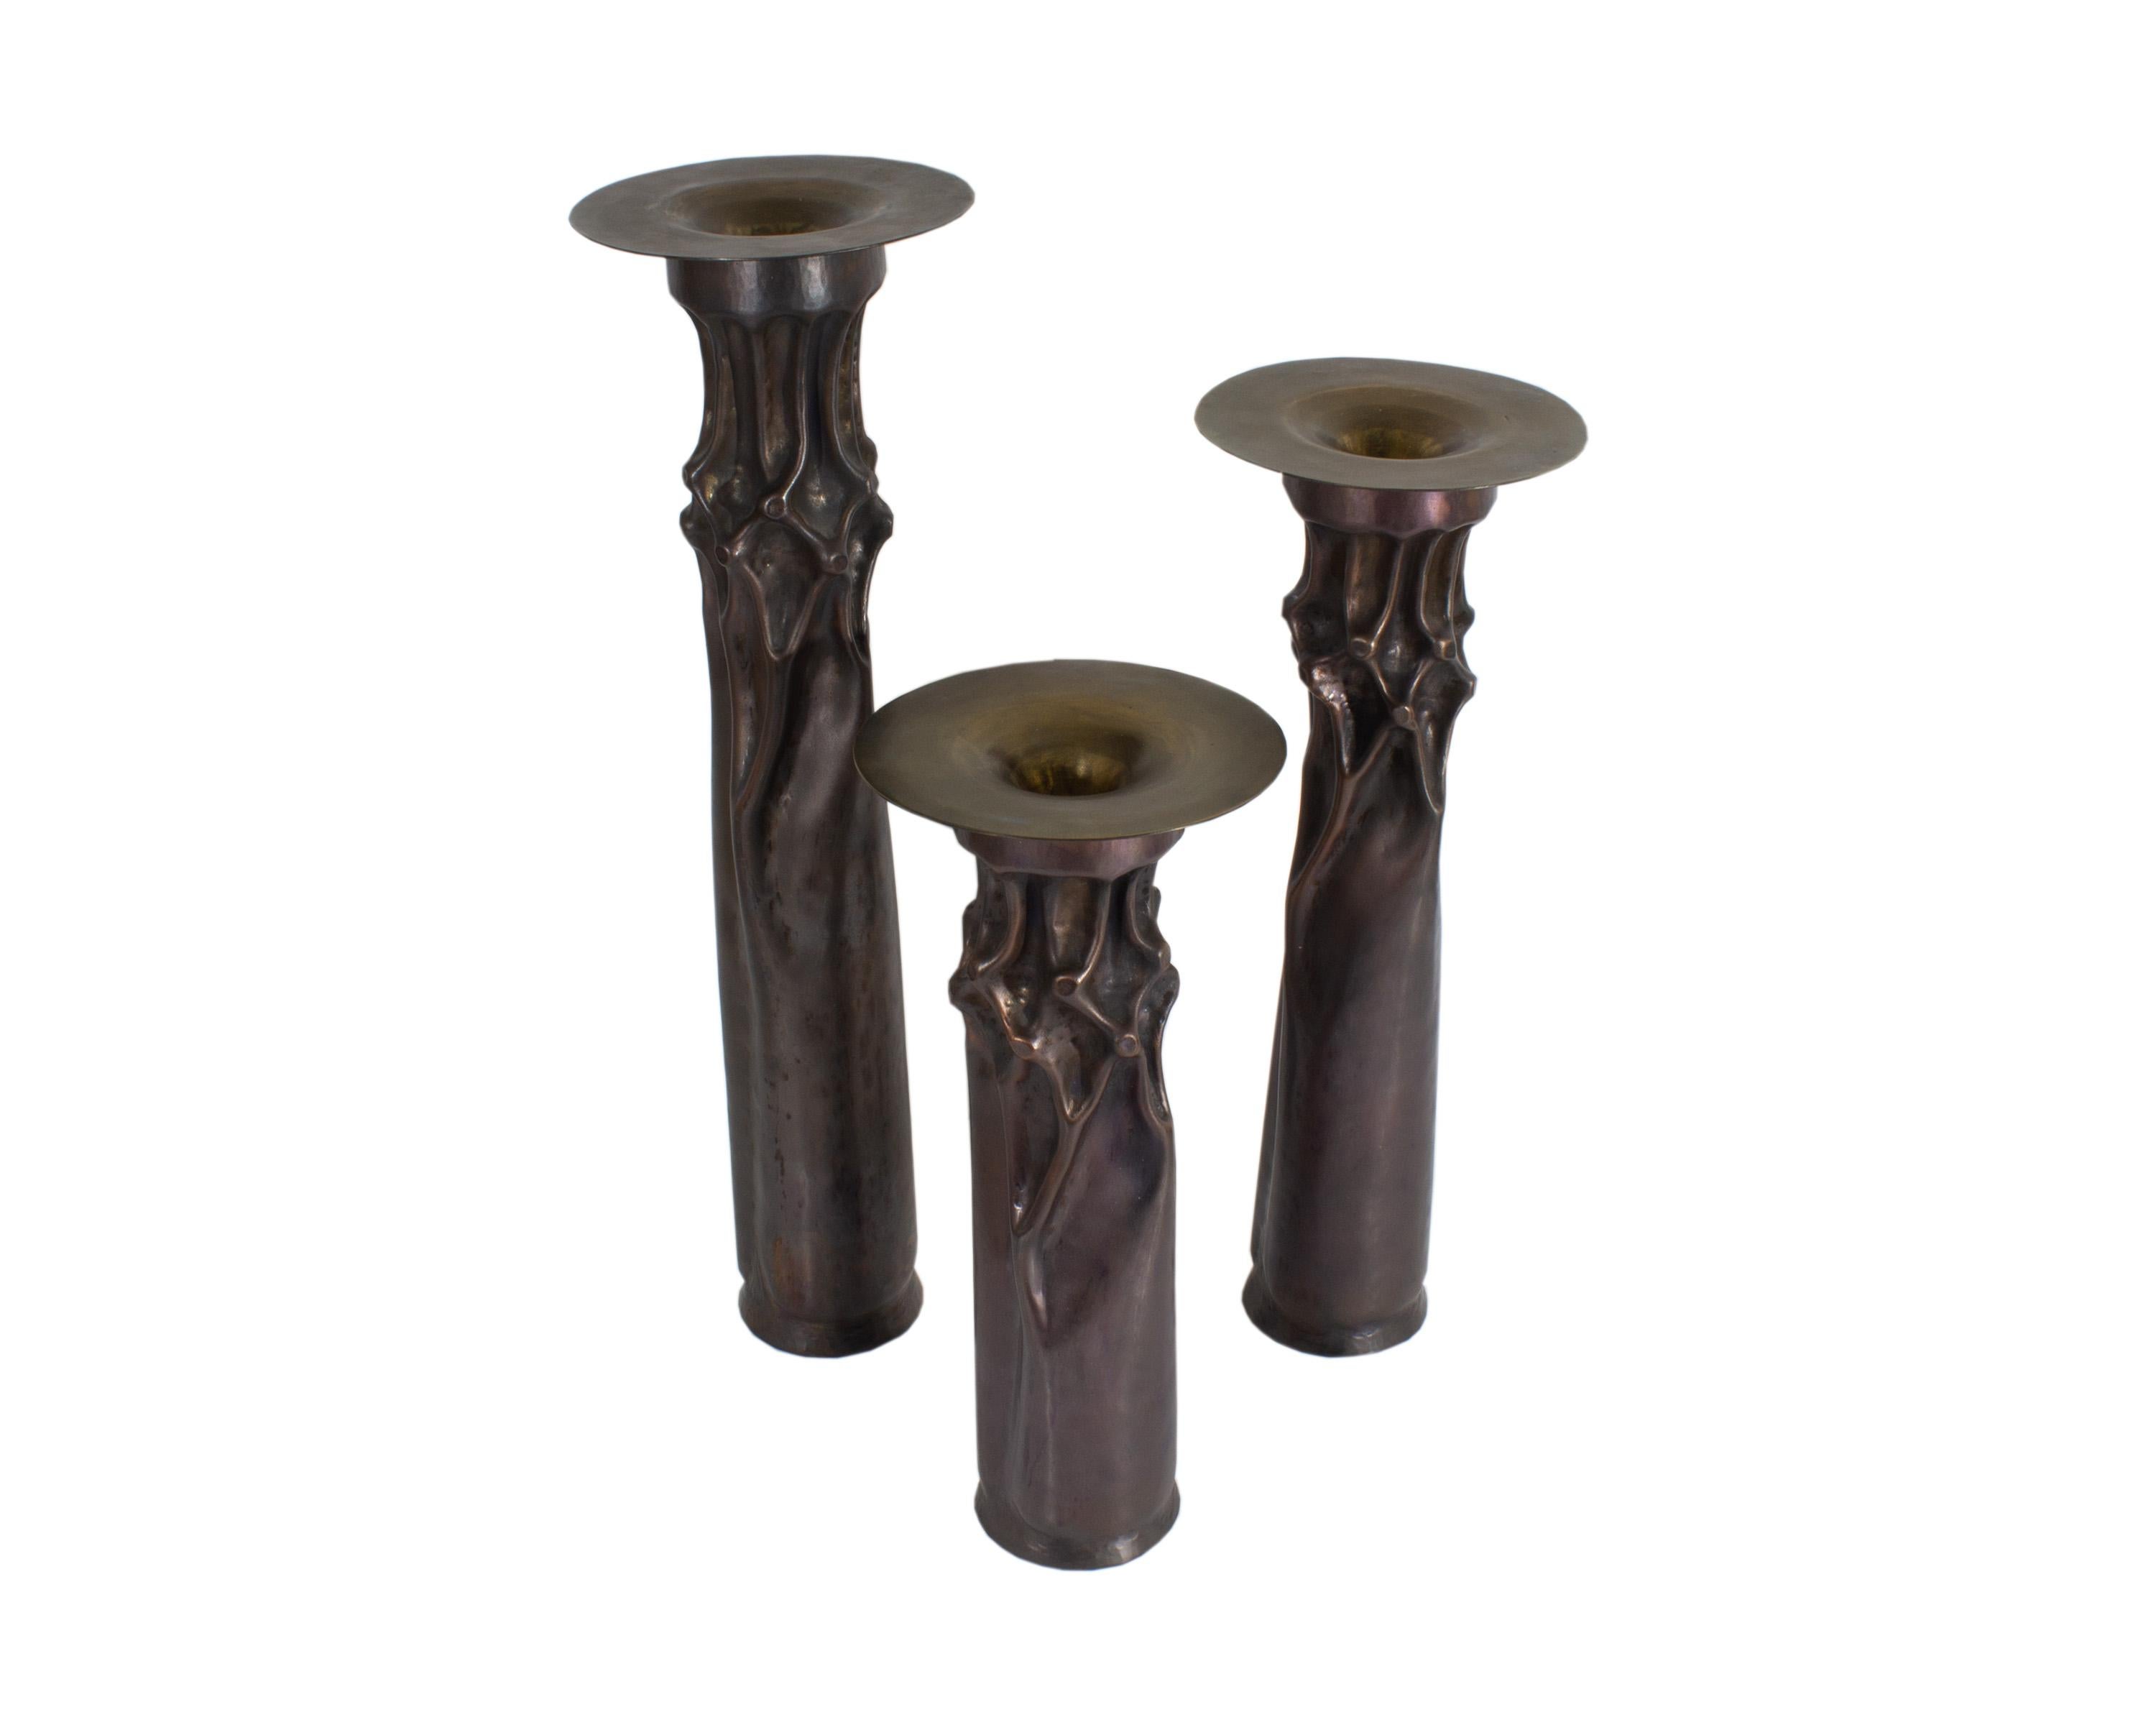 A set of three Brutalist candle holders designed by American artist Thomas Roy Markusen (born 1940). Composed of copper, each candle holder features a cylindrical shape with an abstracted sculptural design just below the flared holder. All are